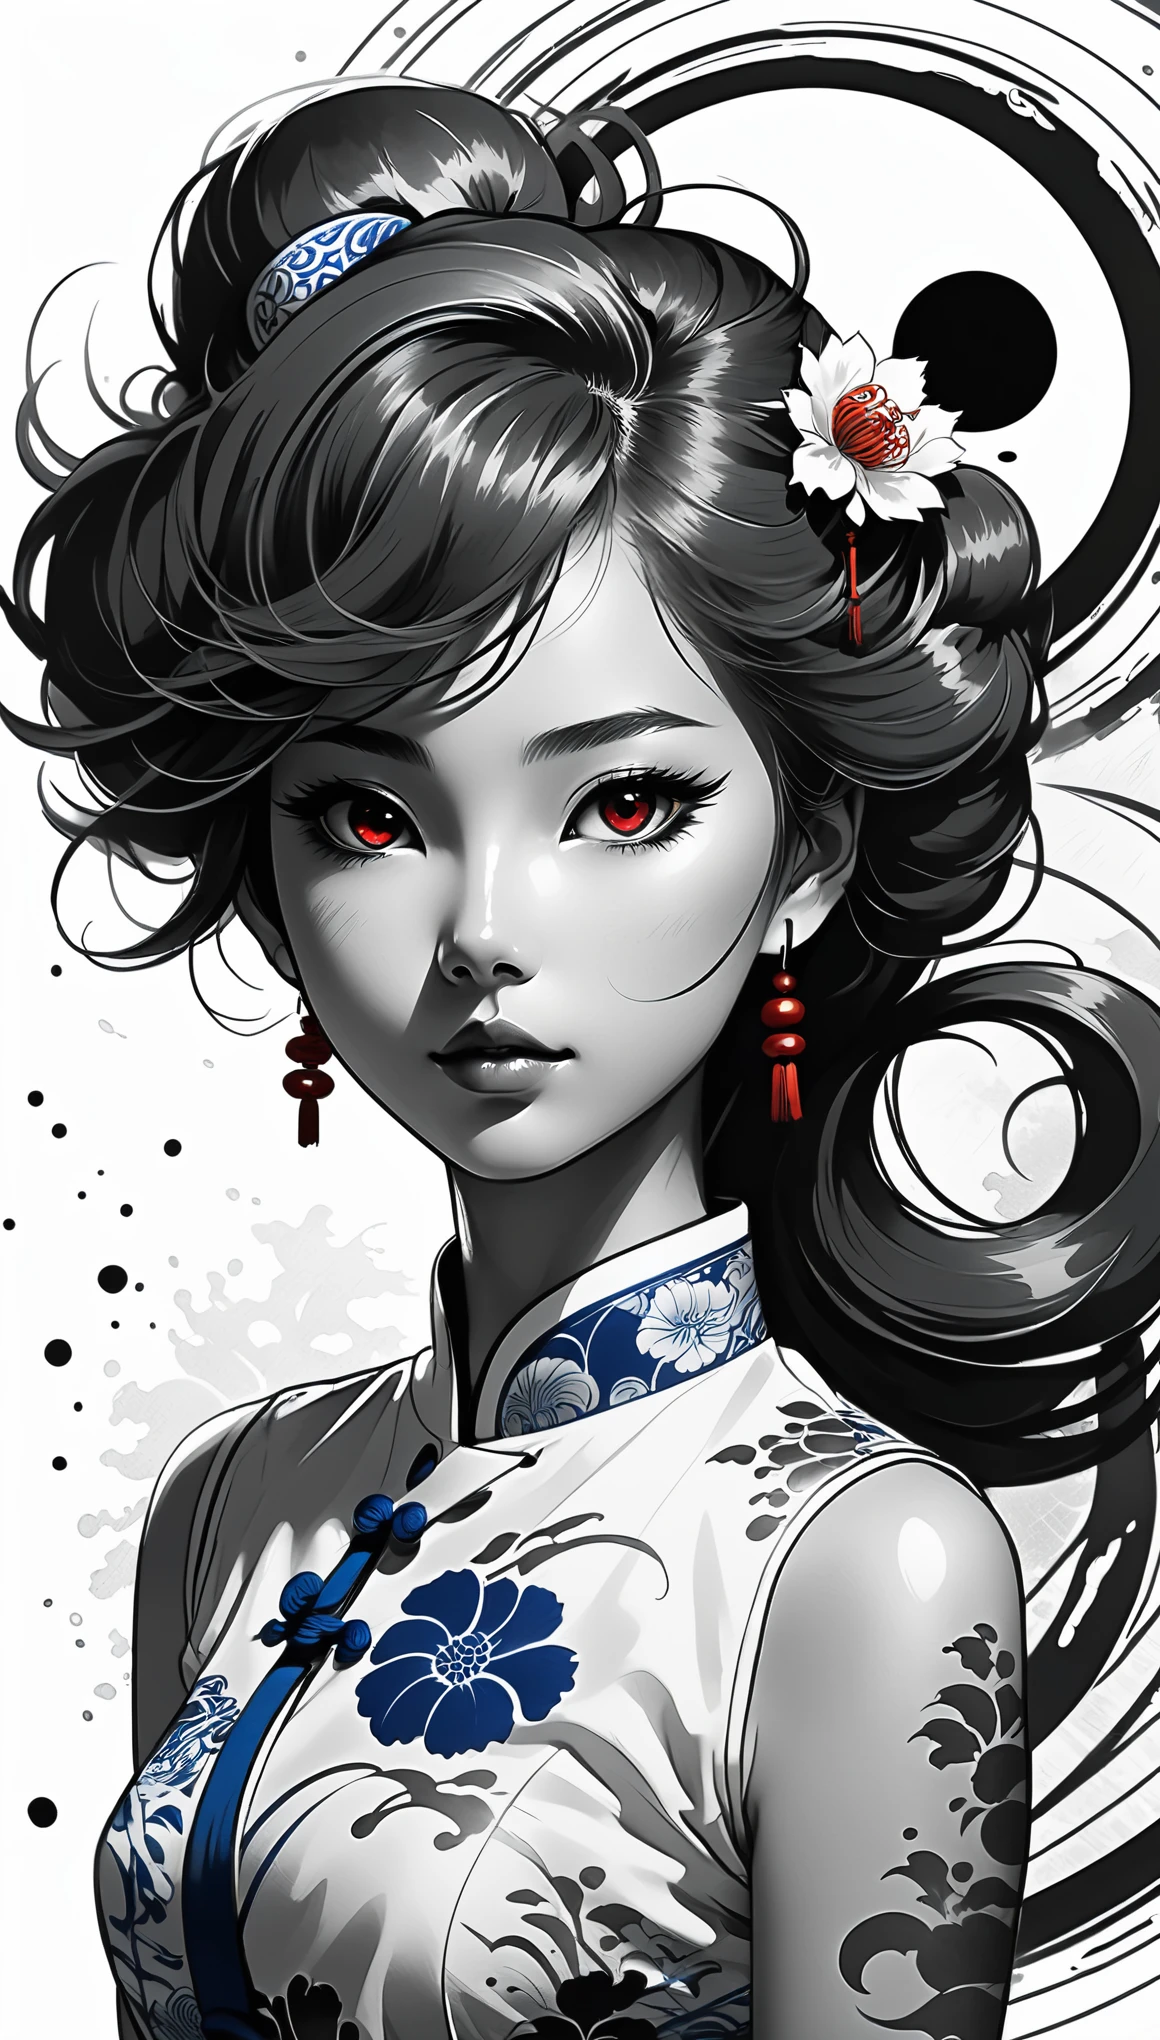 (Pencil_Sketch:1.2, messy lines, greyscale, traditional media, sketch), a girl, flash red eyes, streaked hair, streaked hair, Blue and white porcelain cheongsam, Black and white yin yang tai chi background, Deep shadows, Charming suit cheongsam design, persian cat, minimalist style, Tai Chi, Yin Yang style, Ink splash style background., chiaroscuro, glowing light, backlighting, motion lines, Carl Larsson, UHD, anatomically correct, masterpiece, retina, UHD, masterpiece